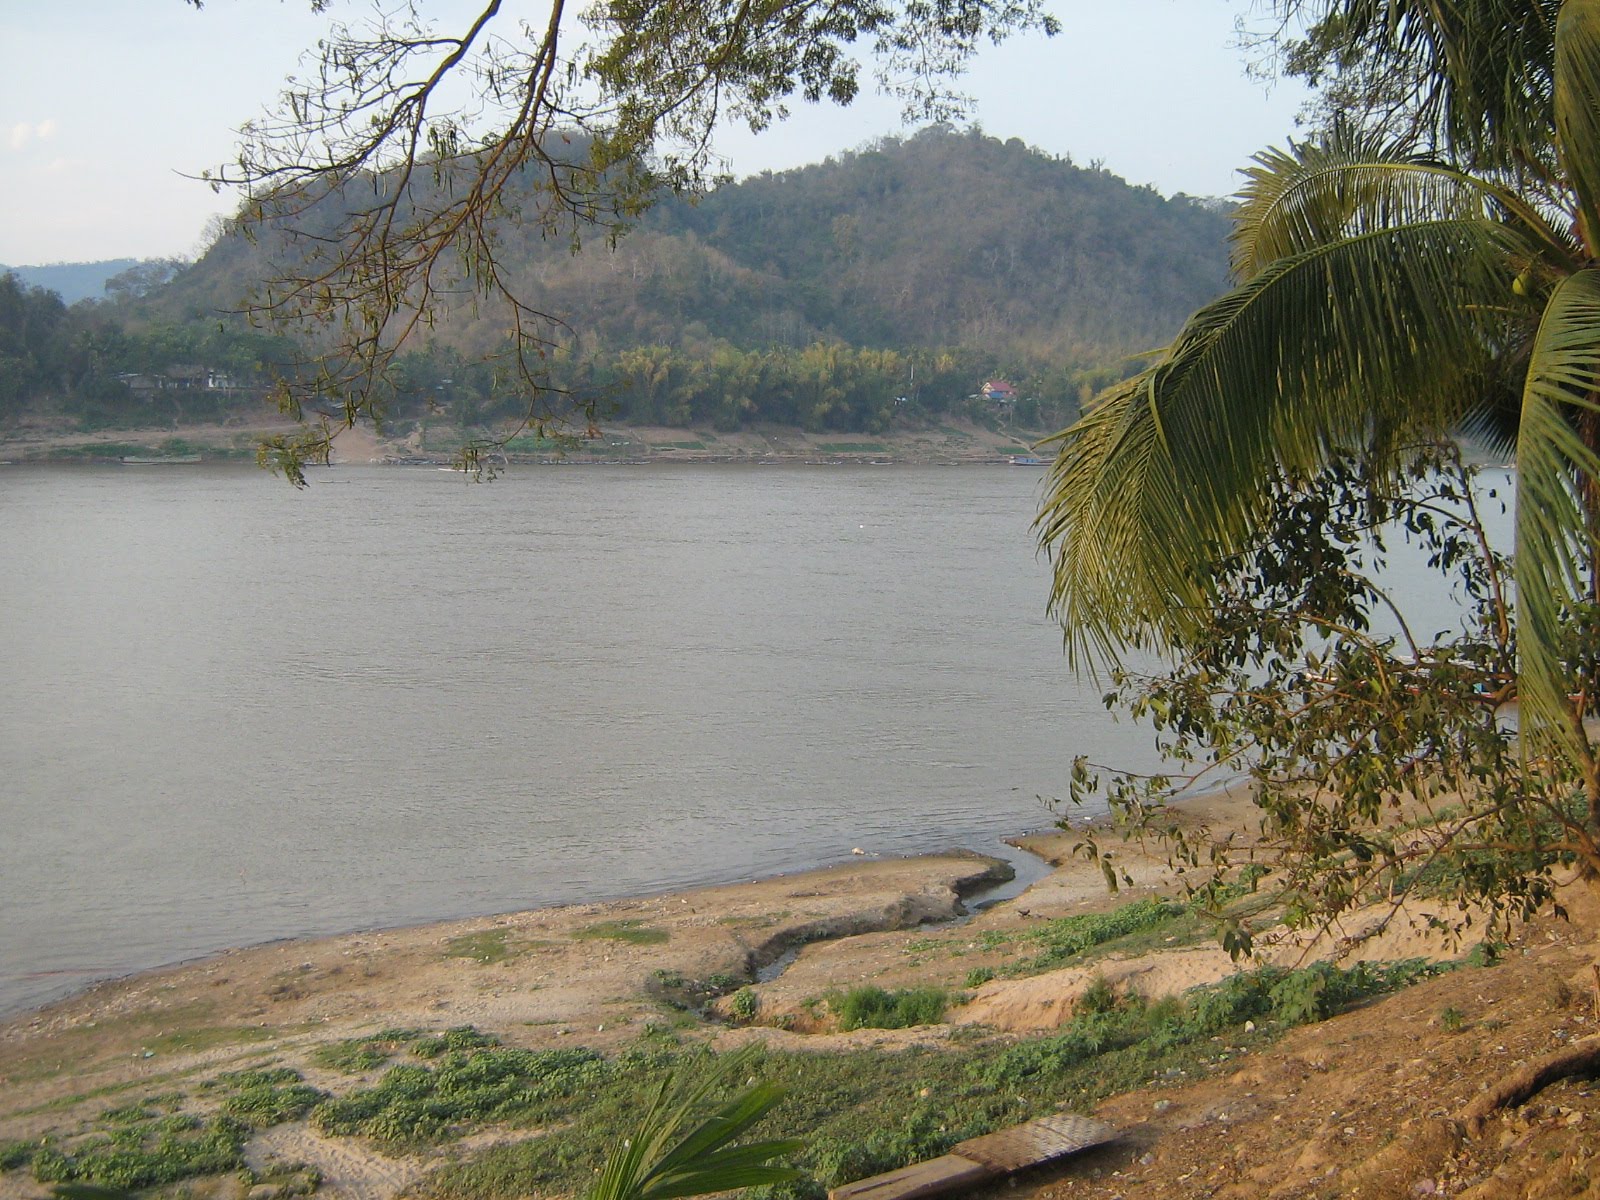 offered by laos wallpaperboat travel along sunset mekong who will